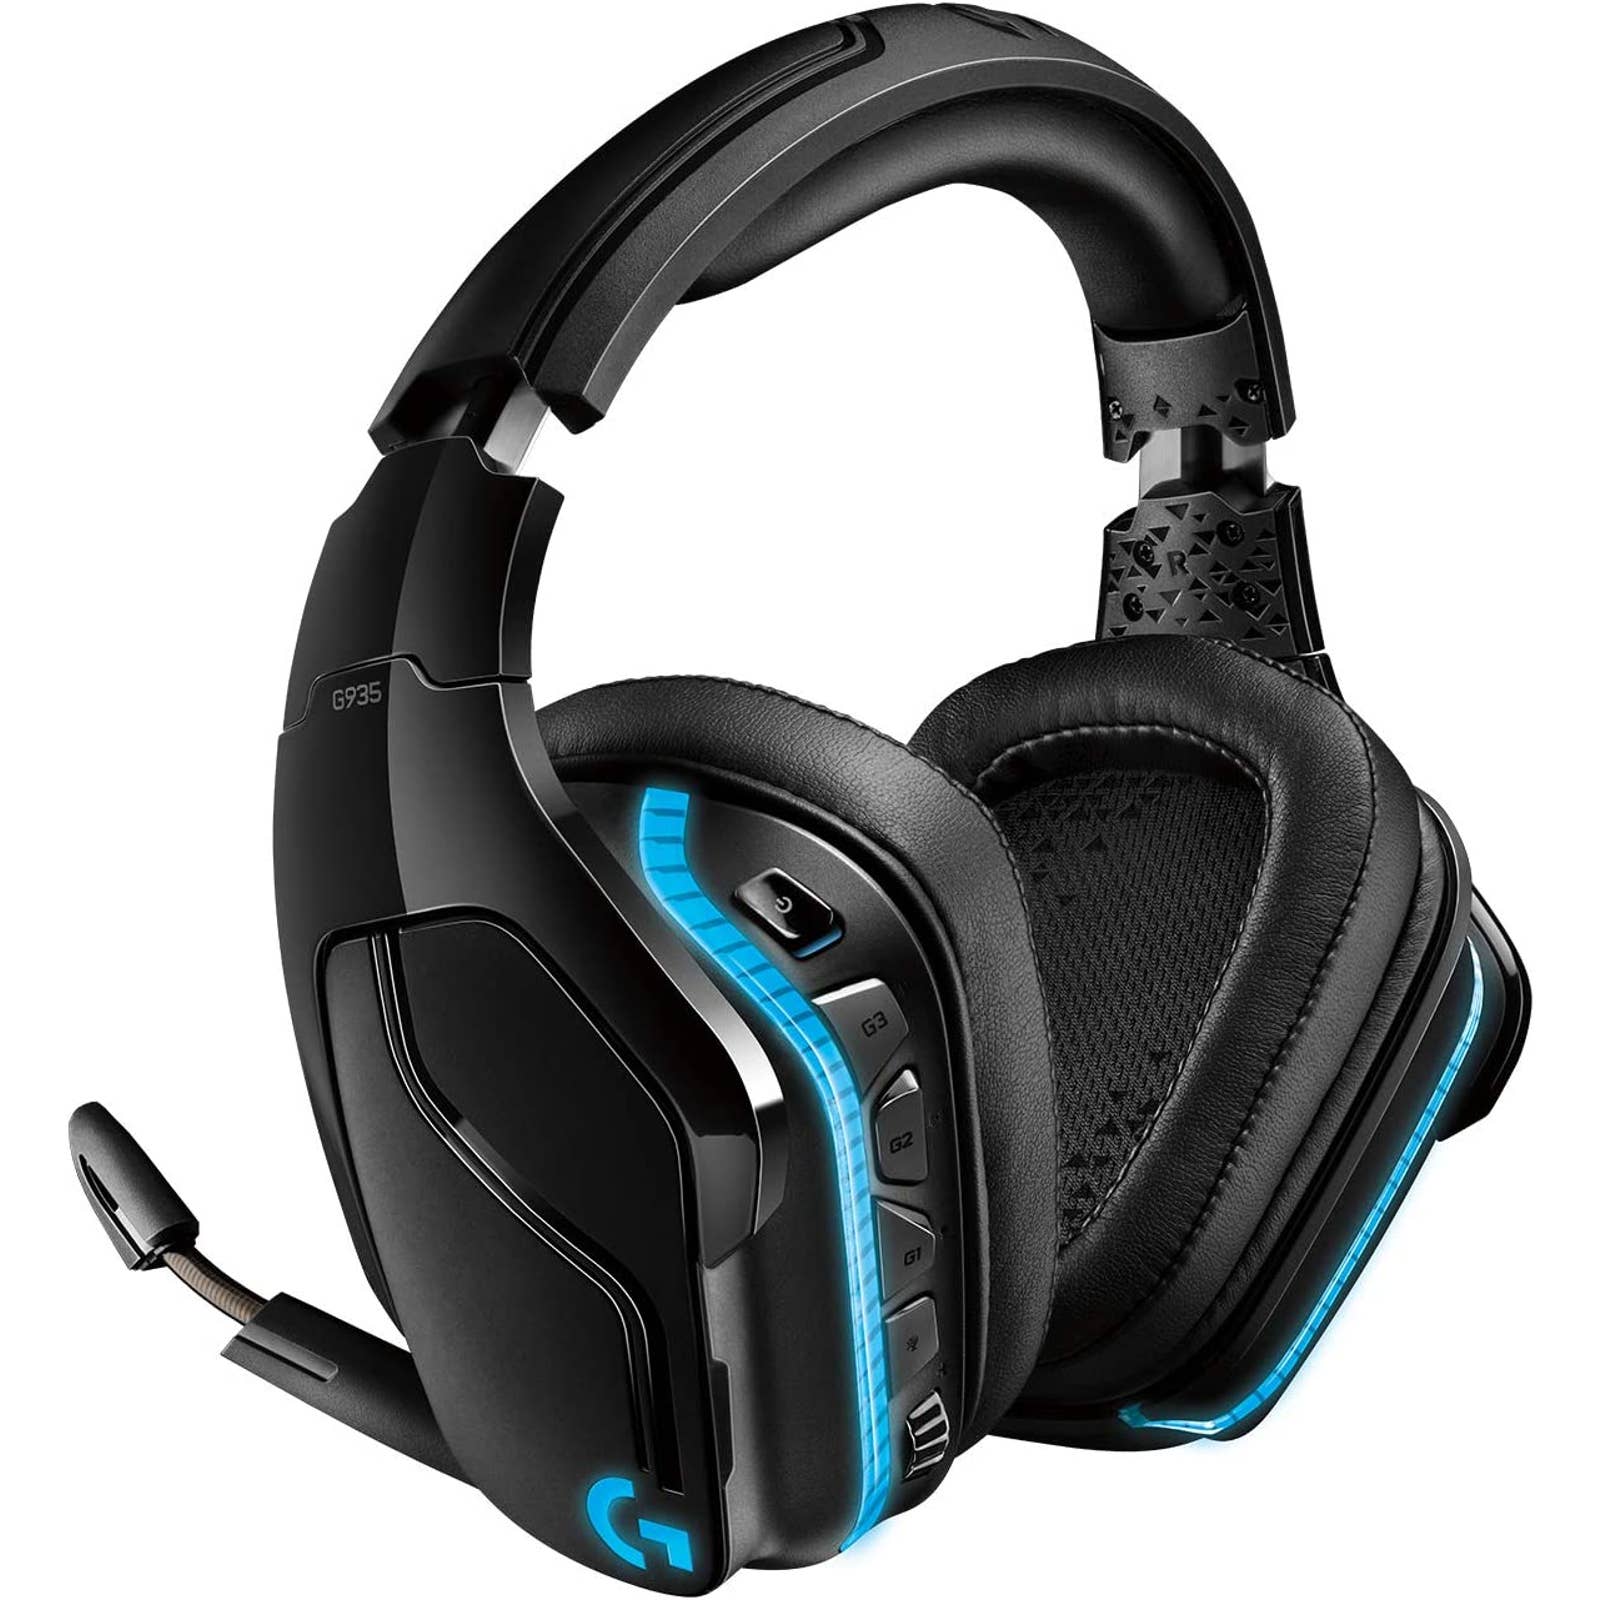 Logitech - 981-000742 G935 Wireless 7.1 Surround Sound Over-the-Ear Gaming Headset for PC with LIGHTSYNC RGB Lighting  - Black/Blue